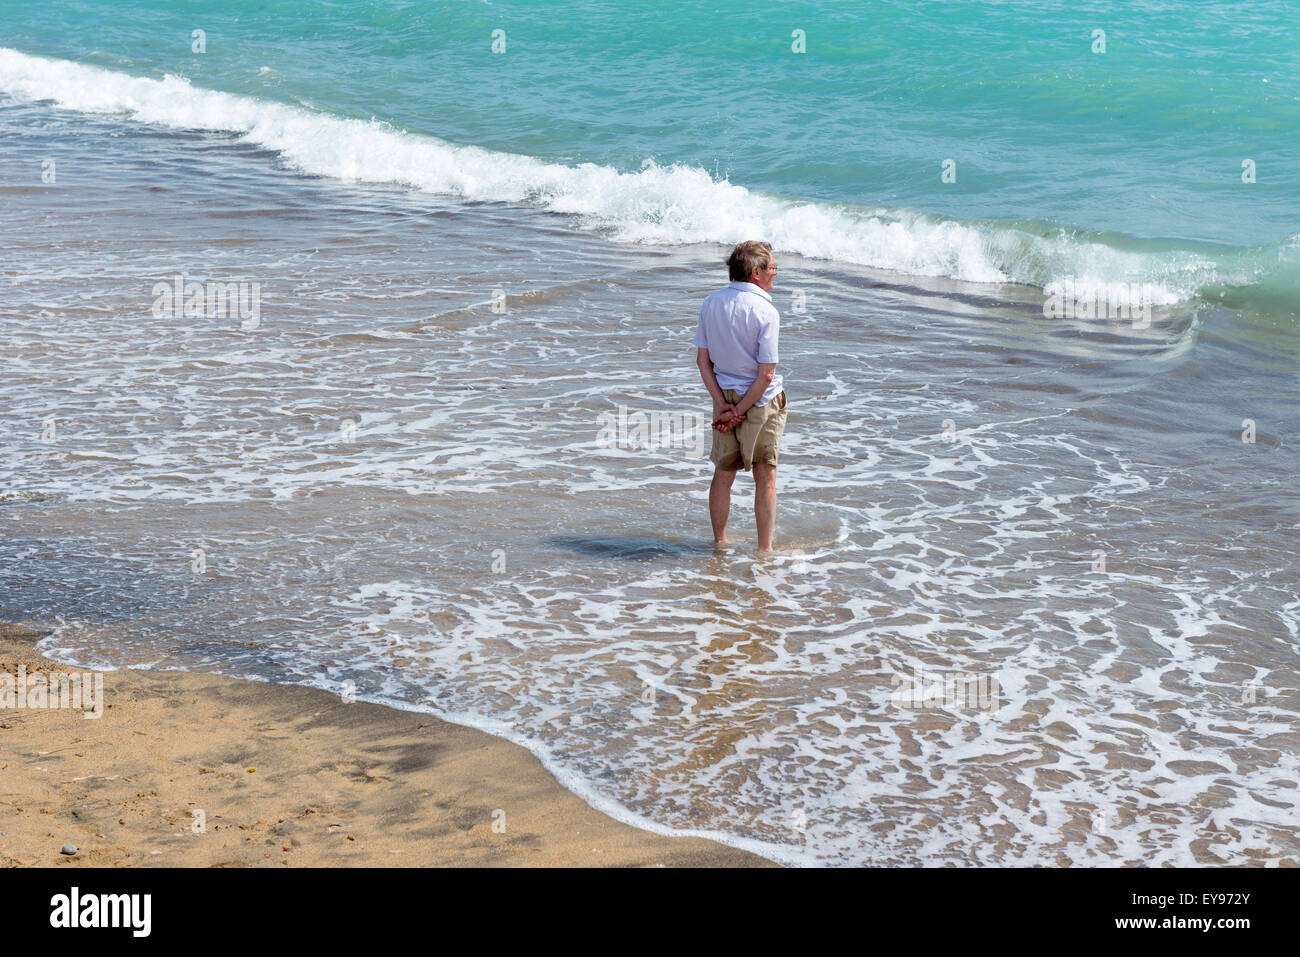 middle aged man wearing shorts and summer shirt standing ankle deep in the surf on a sandy beach at freshwater isle of wight Stock Photo